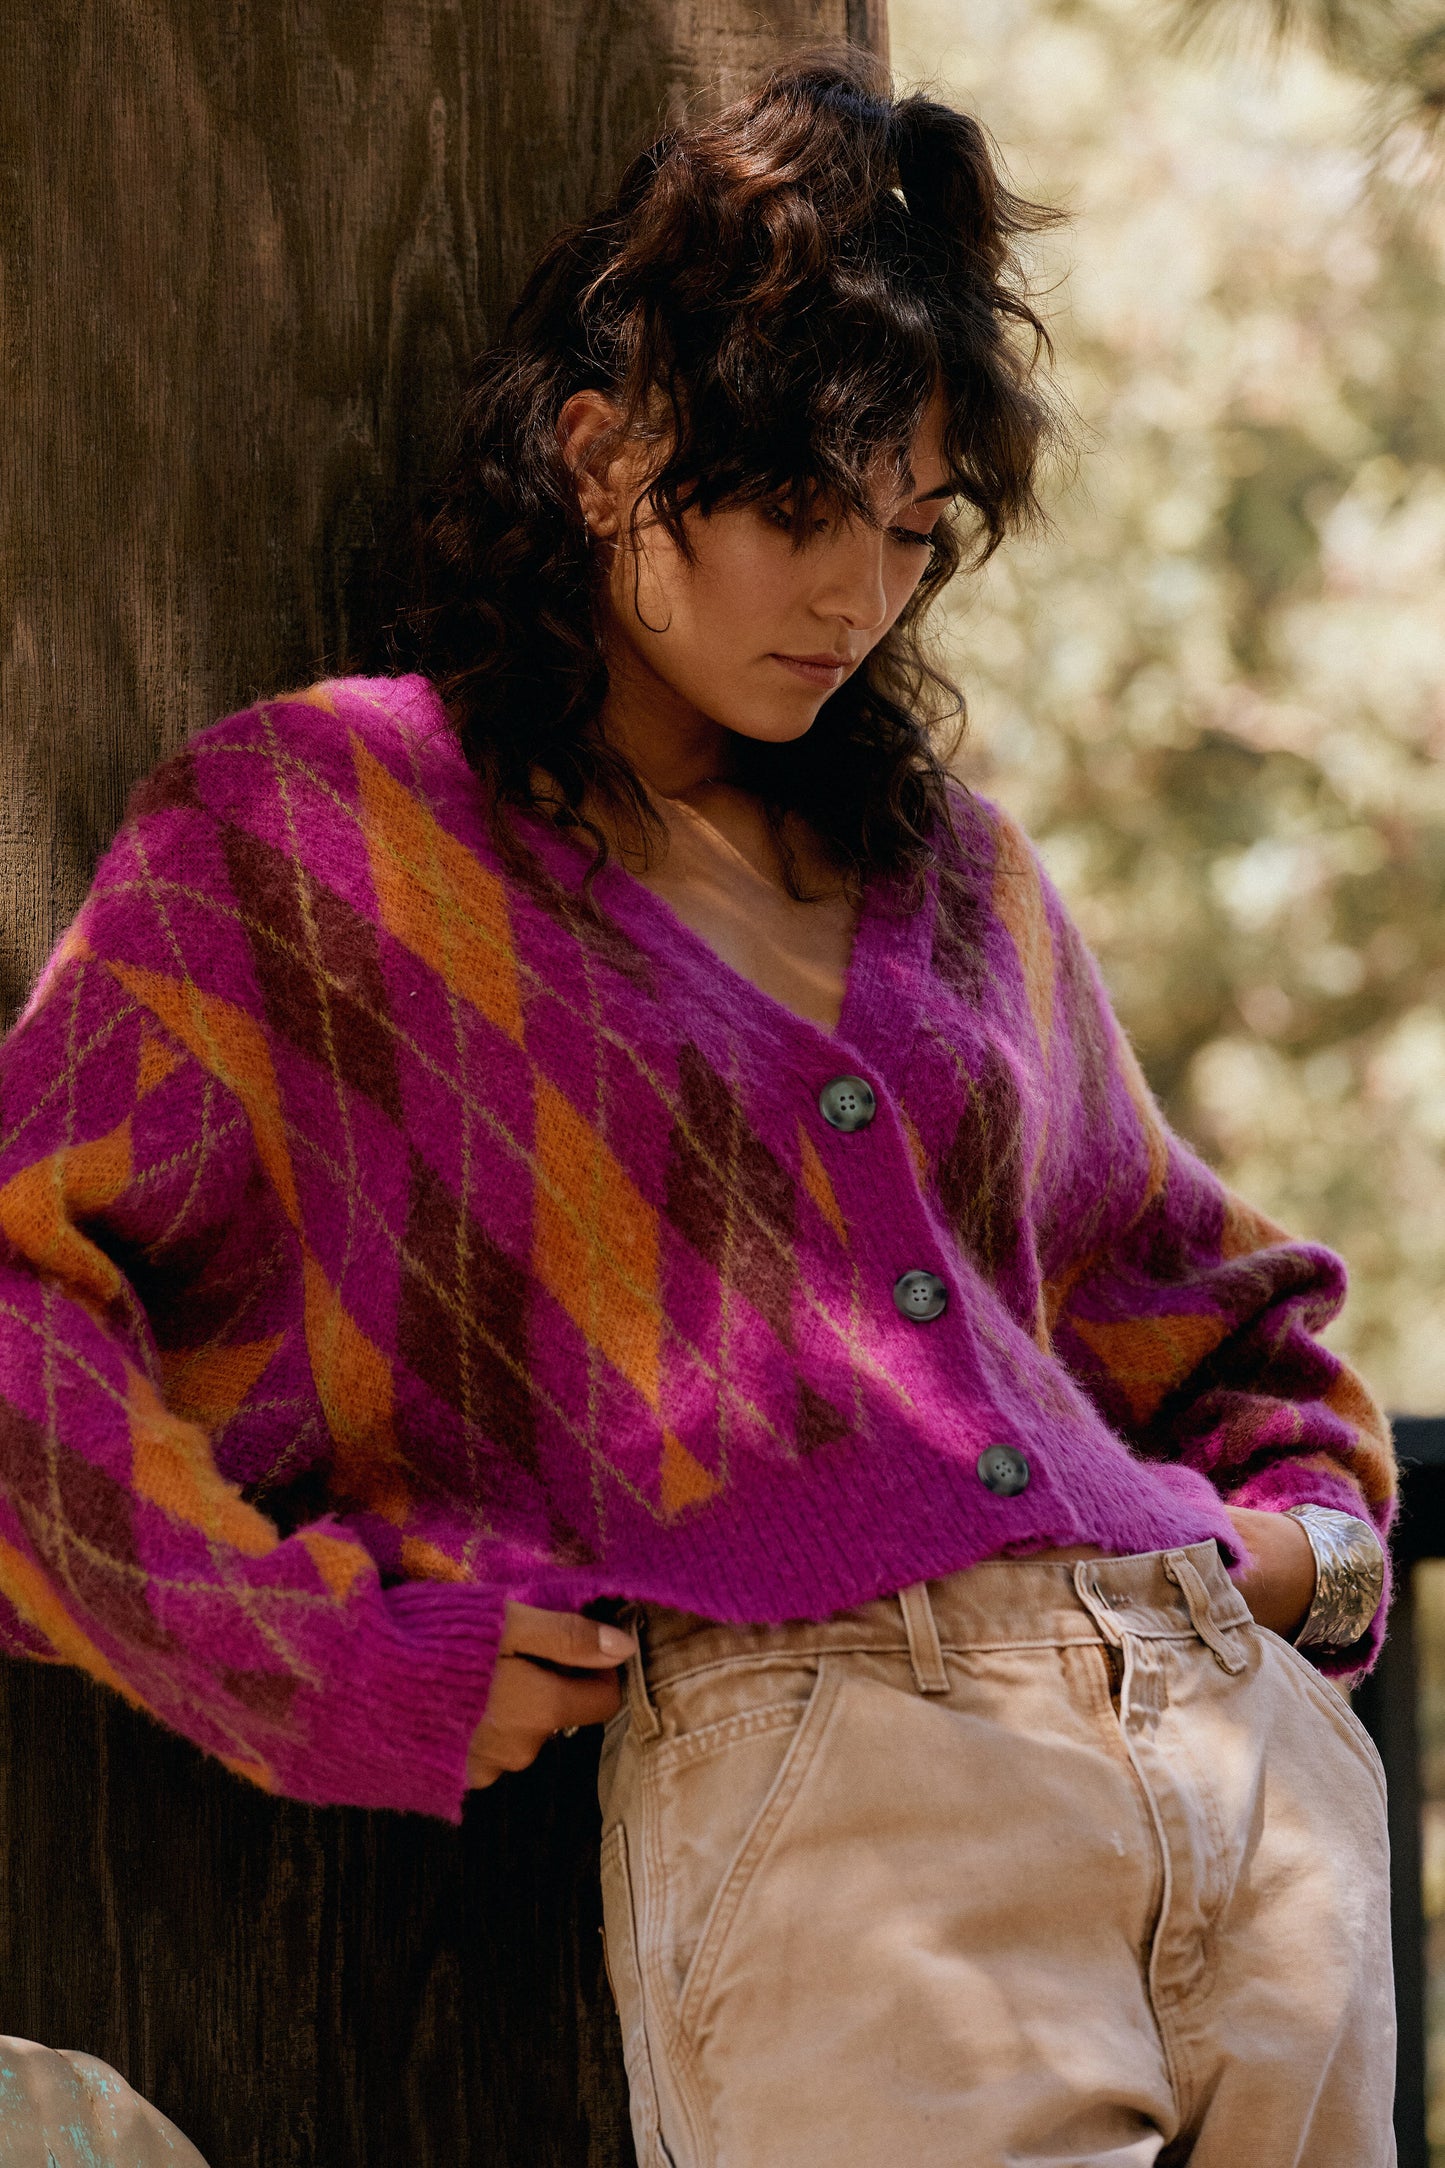 Dark curly-haired model featuring  a relaxed, slightly cropped, ultra cozy cardigan designed in a standout argyle pattern in unexpected color combos of fuschia, orange and gold